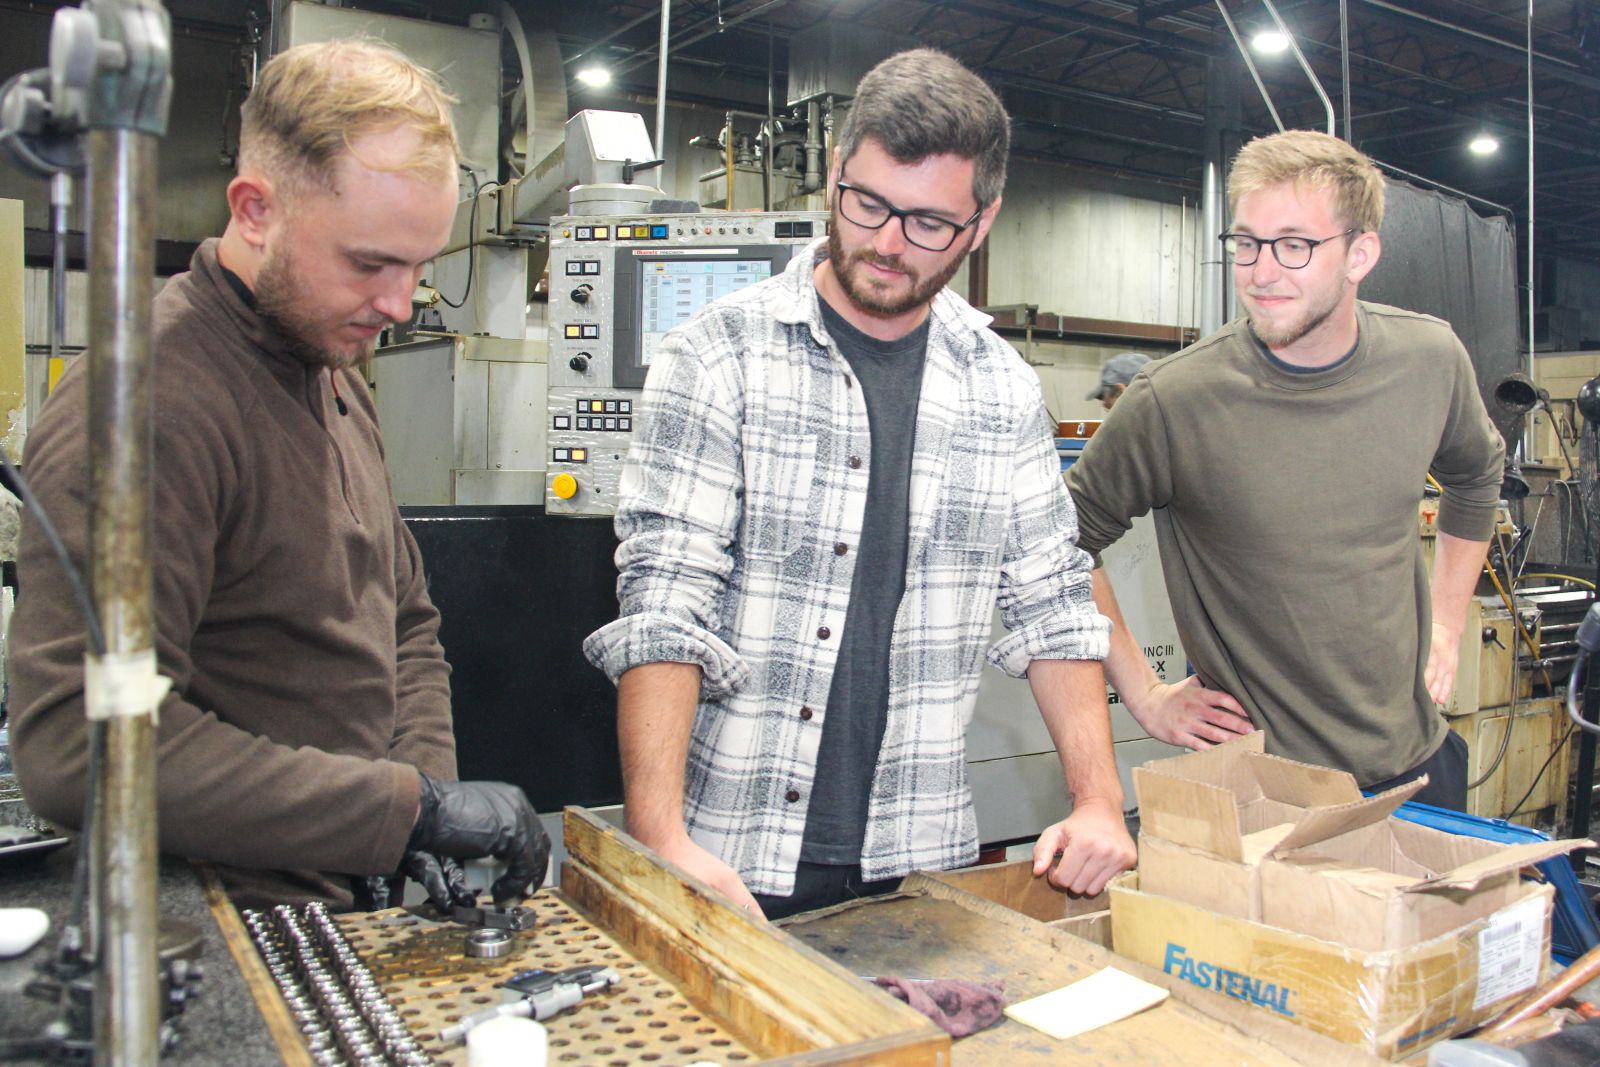 Students from Leopold-Hoesch Berufskolleg, a vocational college in Dortmund, Germany are working and learning in Statesboro as part of an exchange program with Ogeechee Technical College